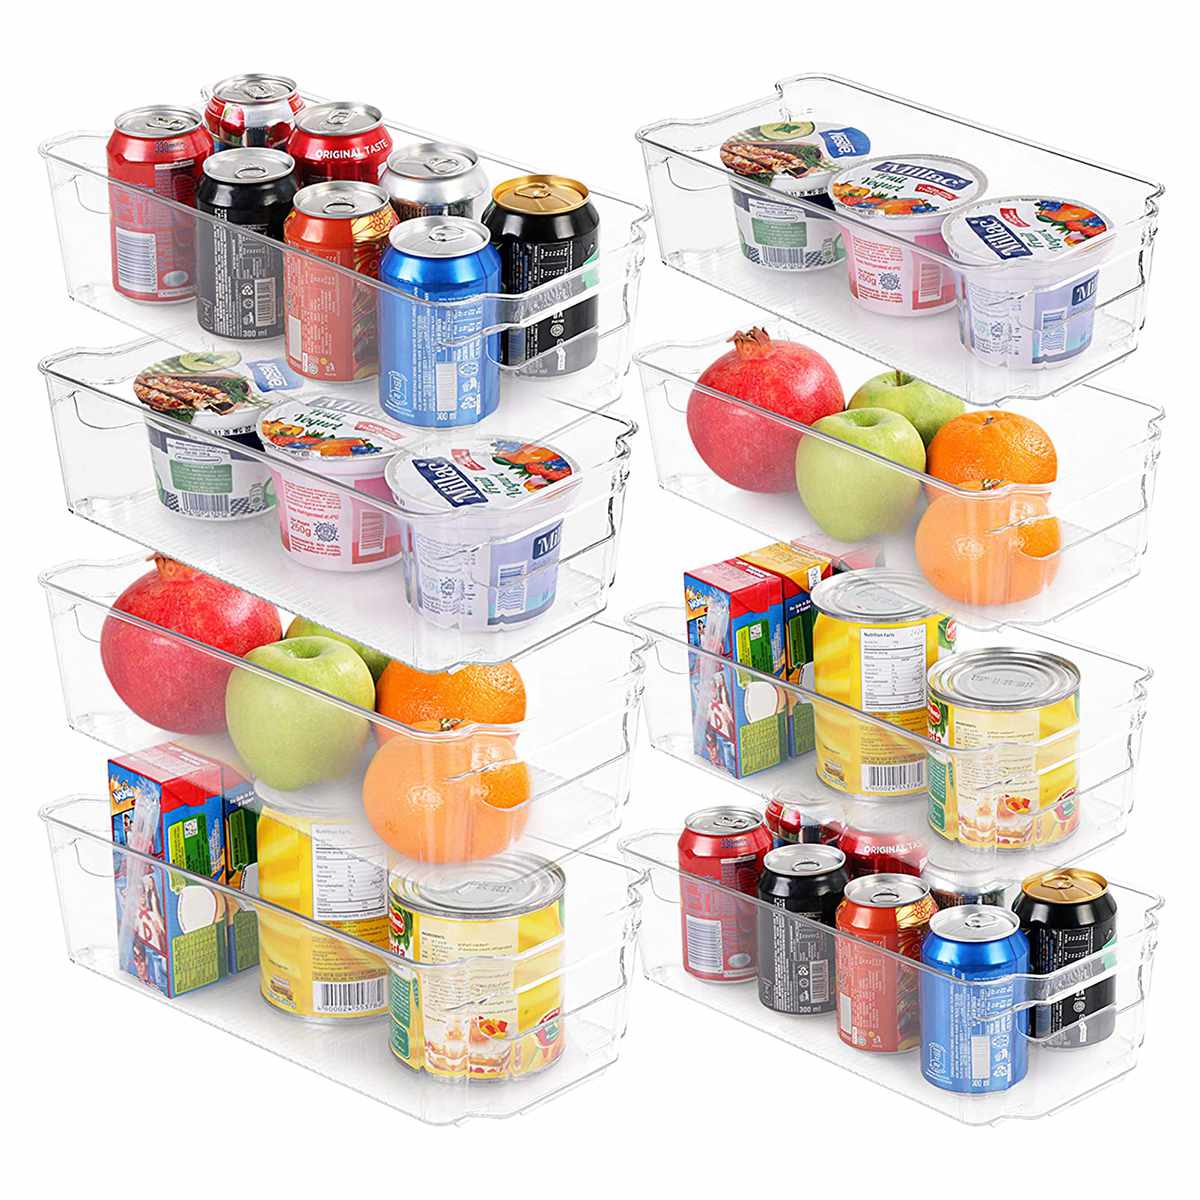 Set of 8 Pantry Organizers-Includes 8 Organizers